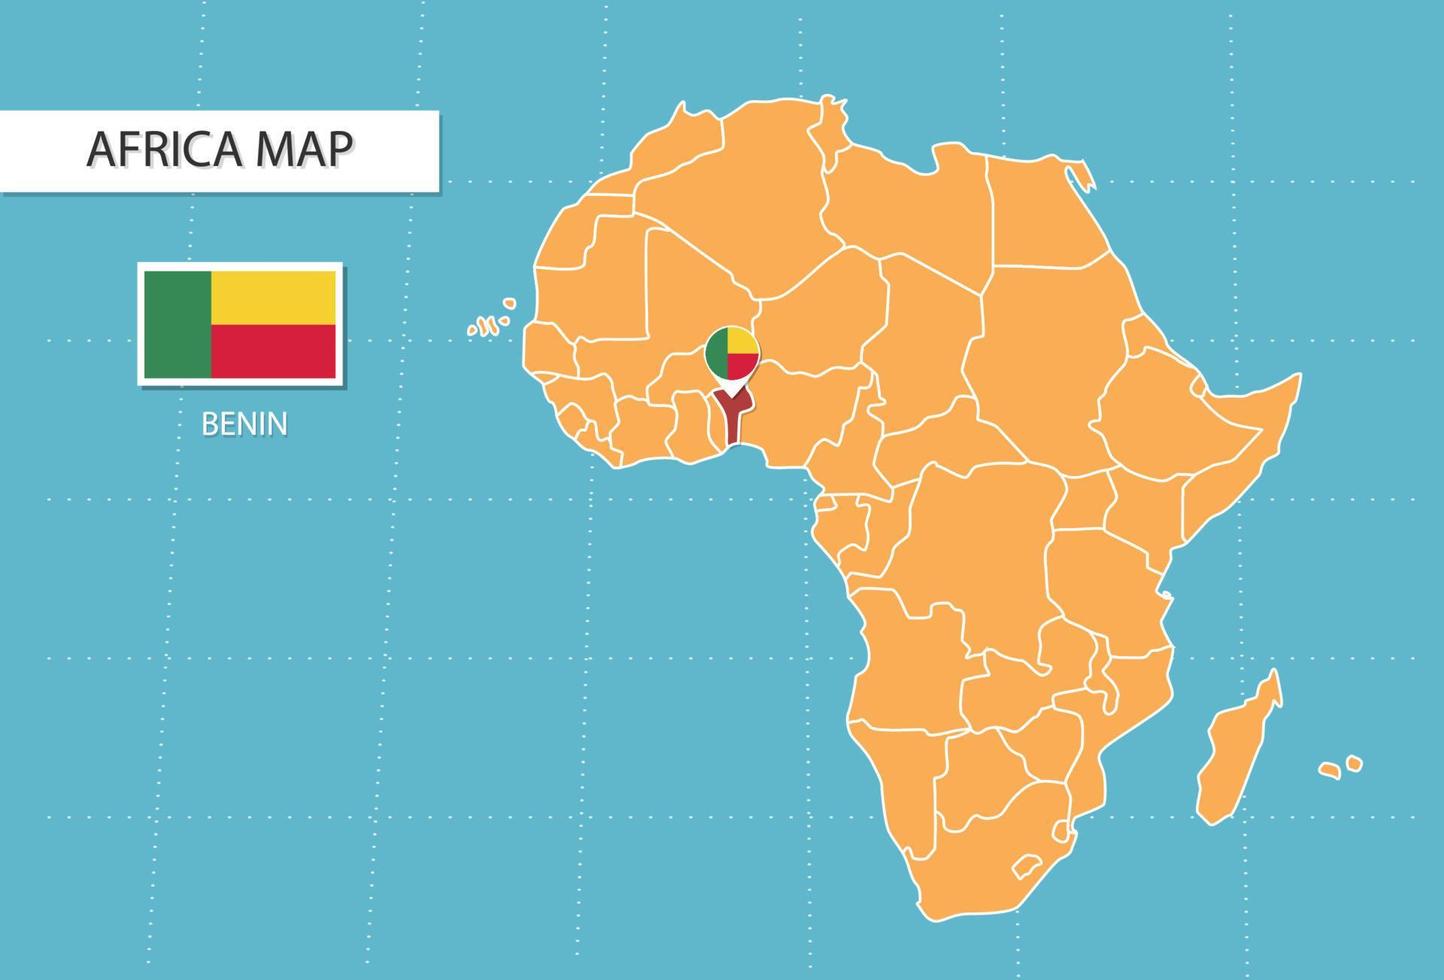 Benin map in Africa, icons showing Benin location and flags. vector